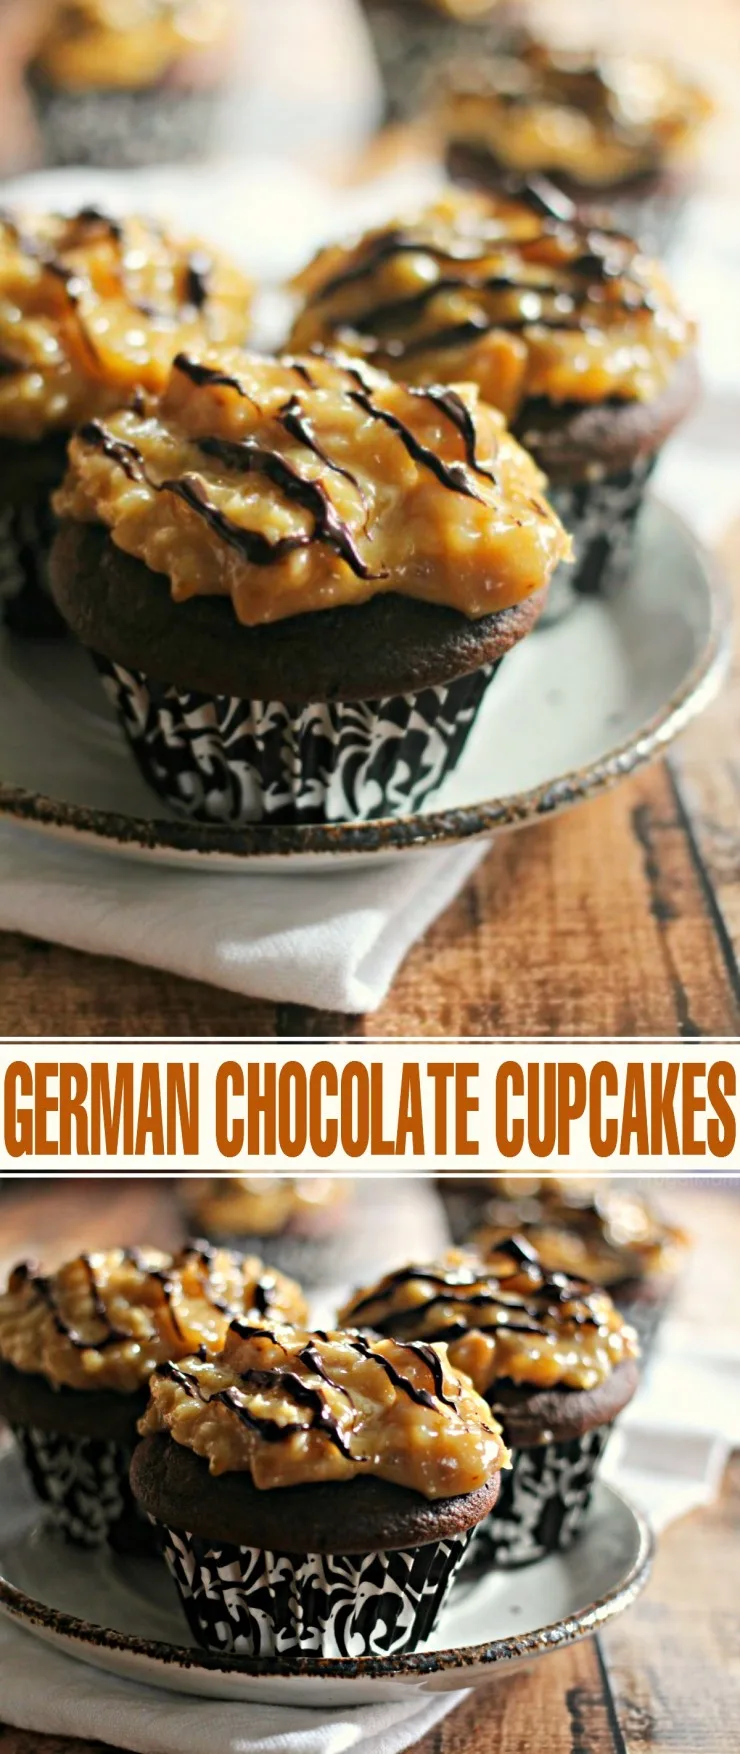 German Chocolate Cupcakes are a delicious chocolate dessert, you will find yourself baking this cupcake recipe over and over again!